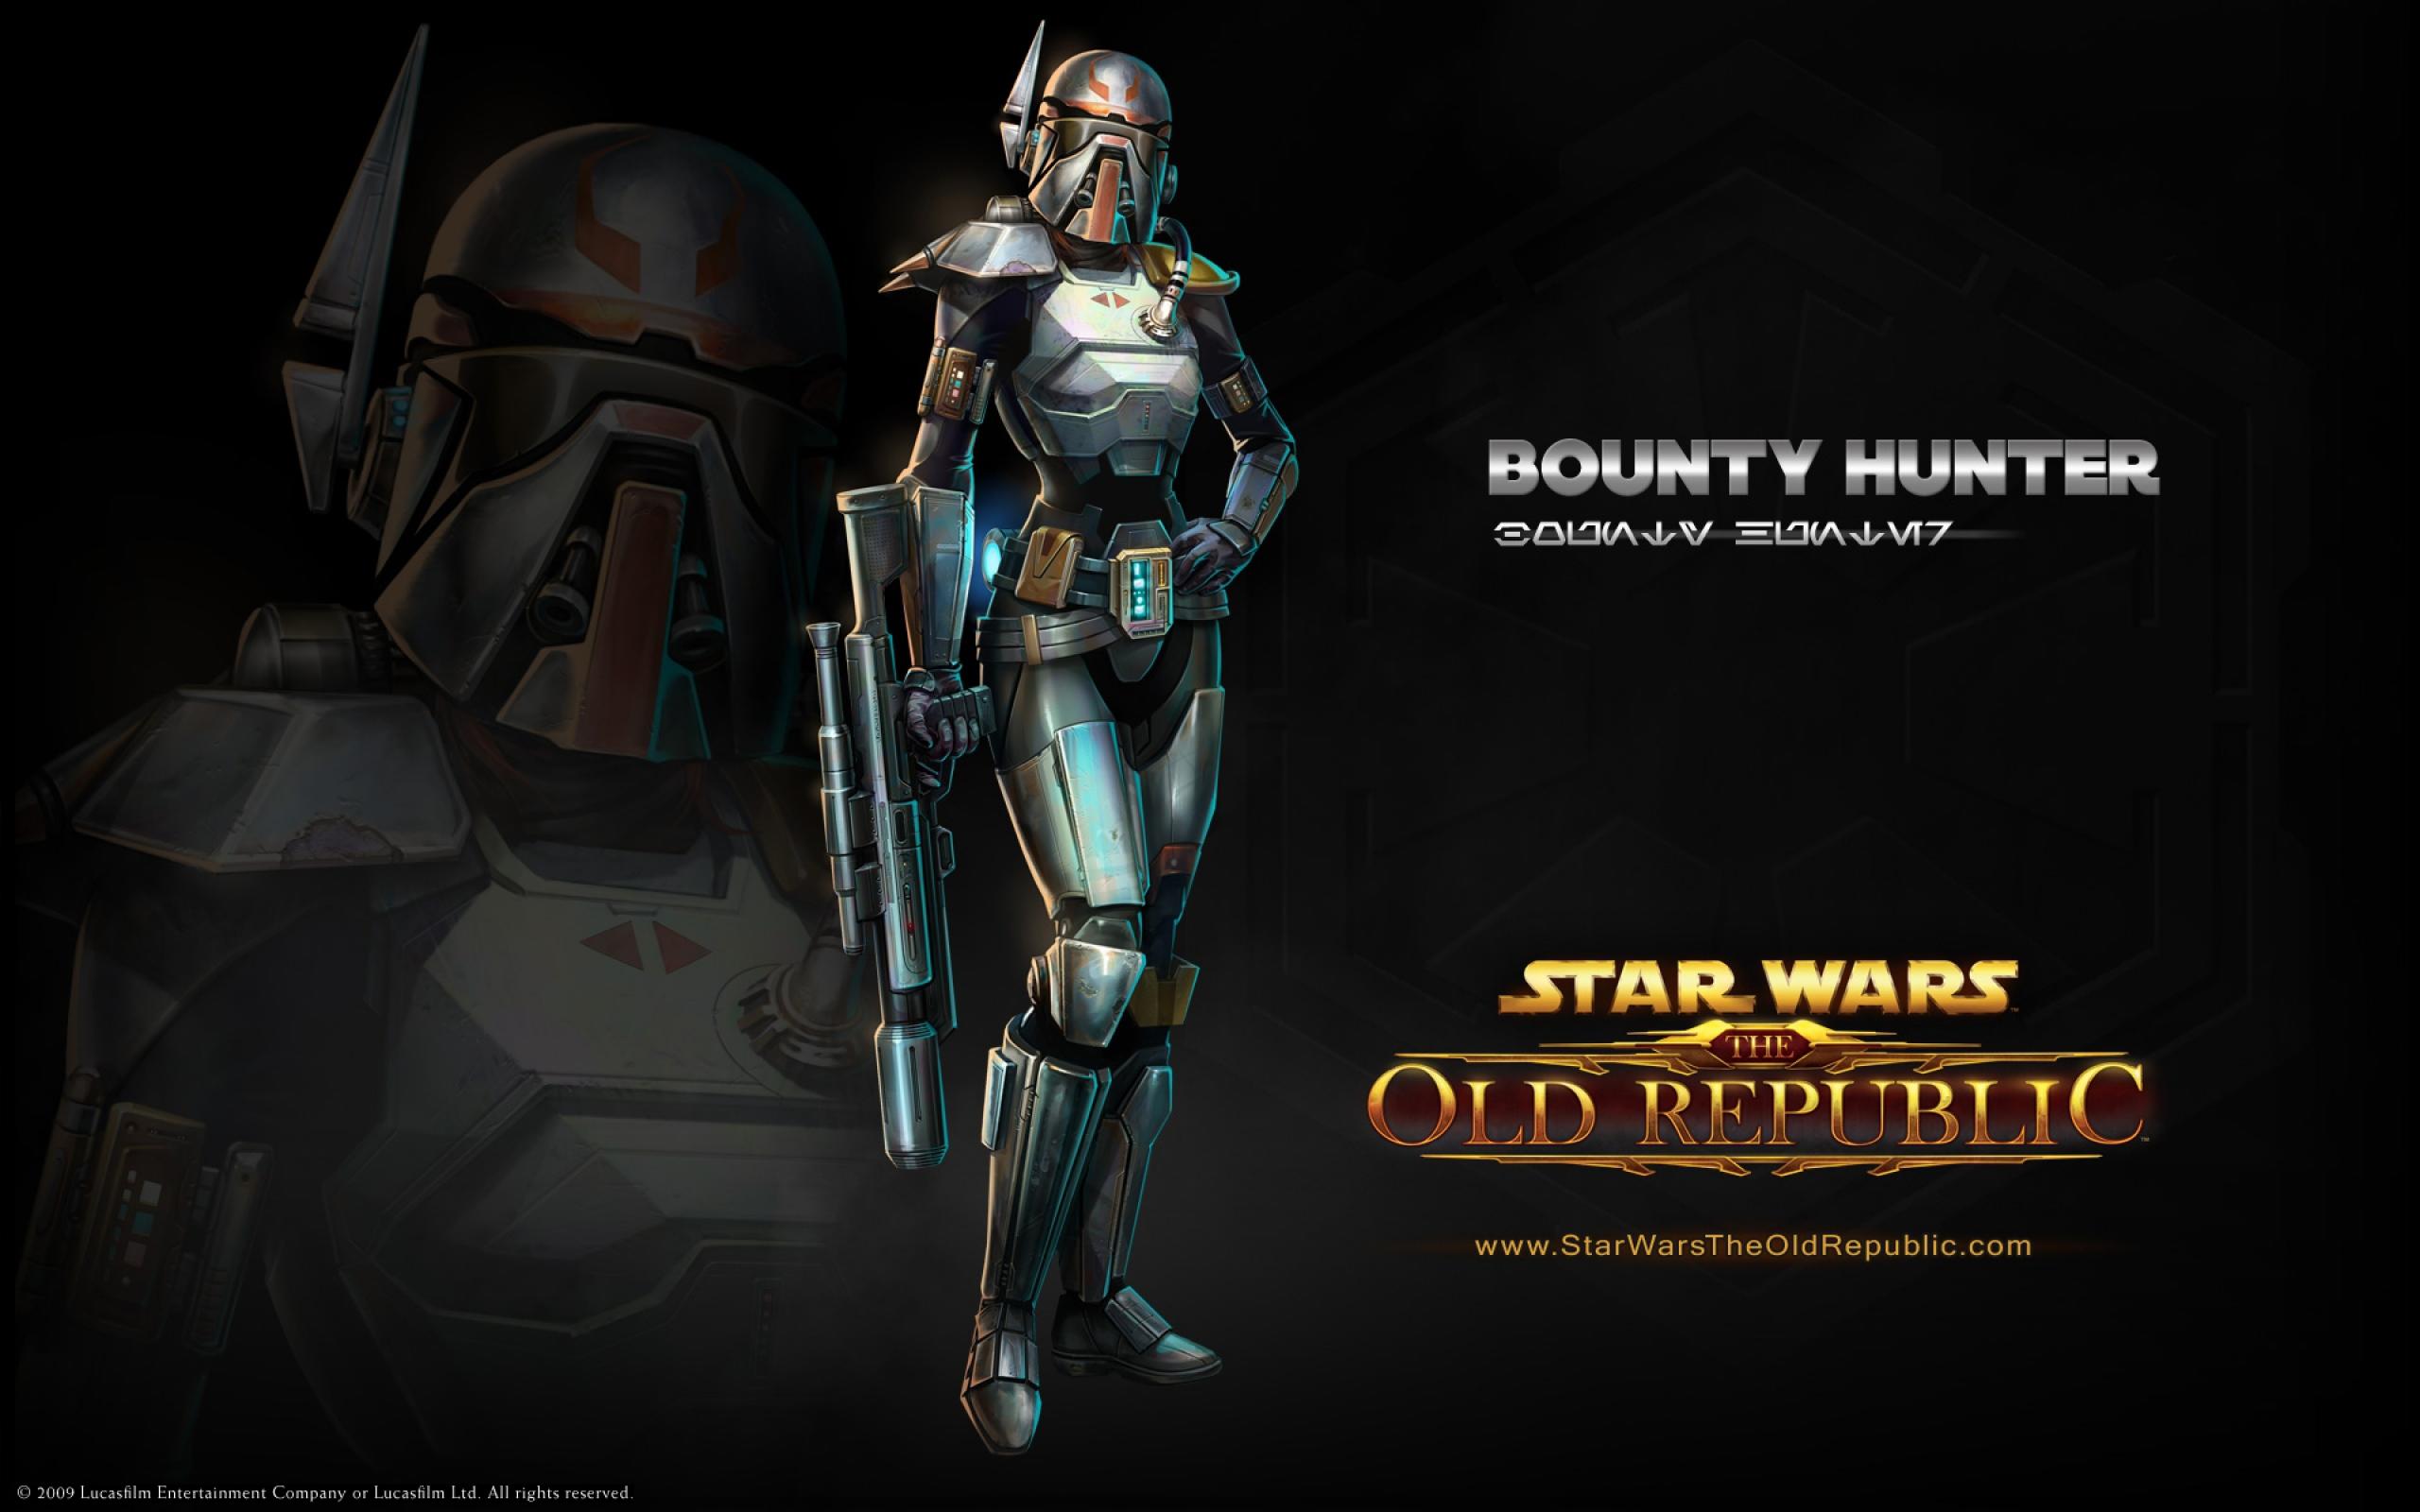 Star Wars: The Old Republic Wallpaper, Picture, Image